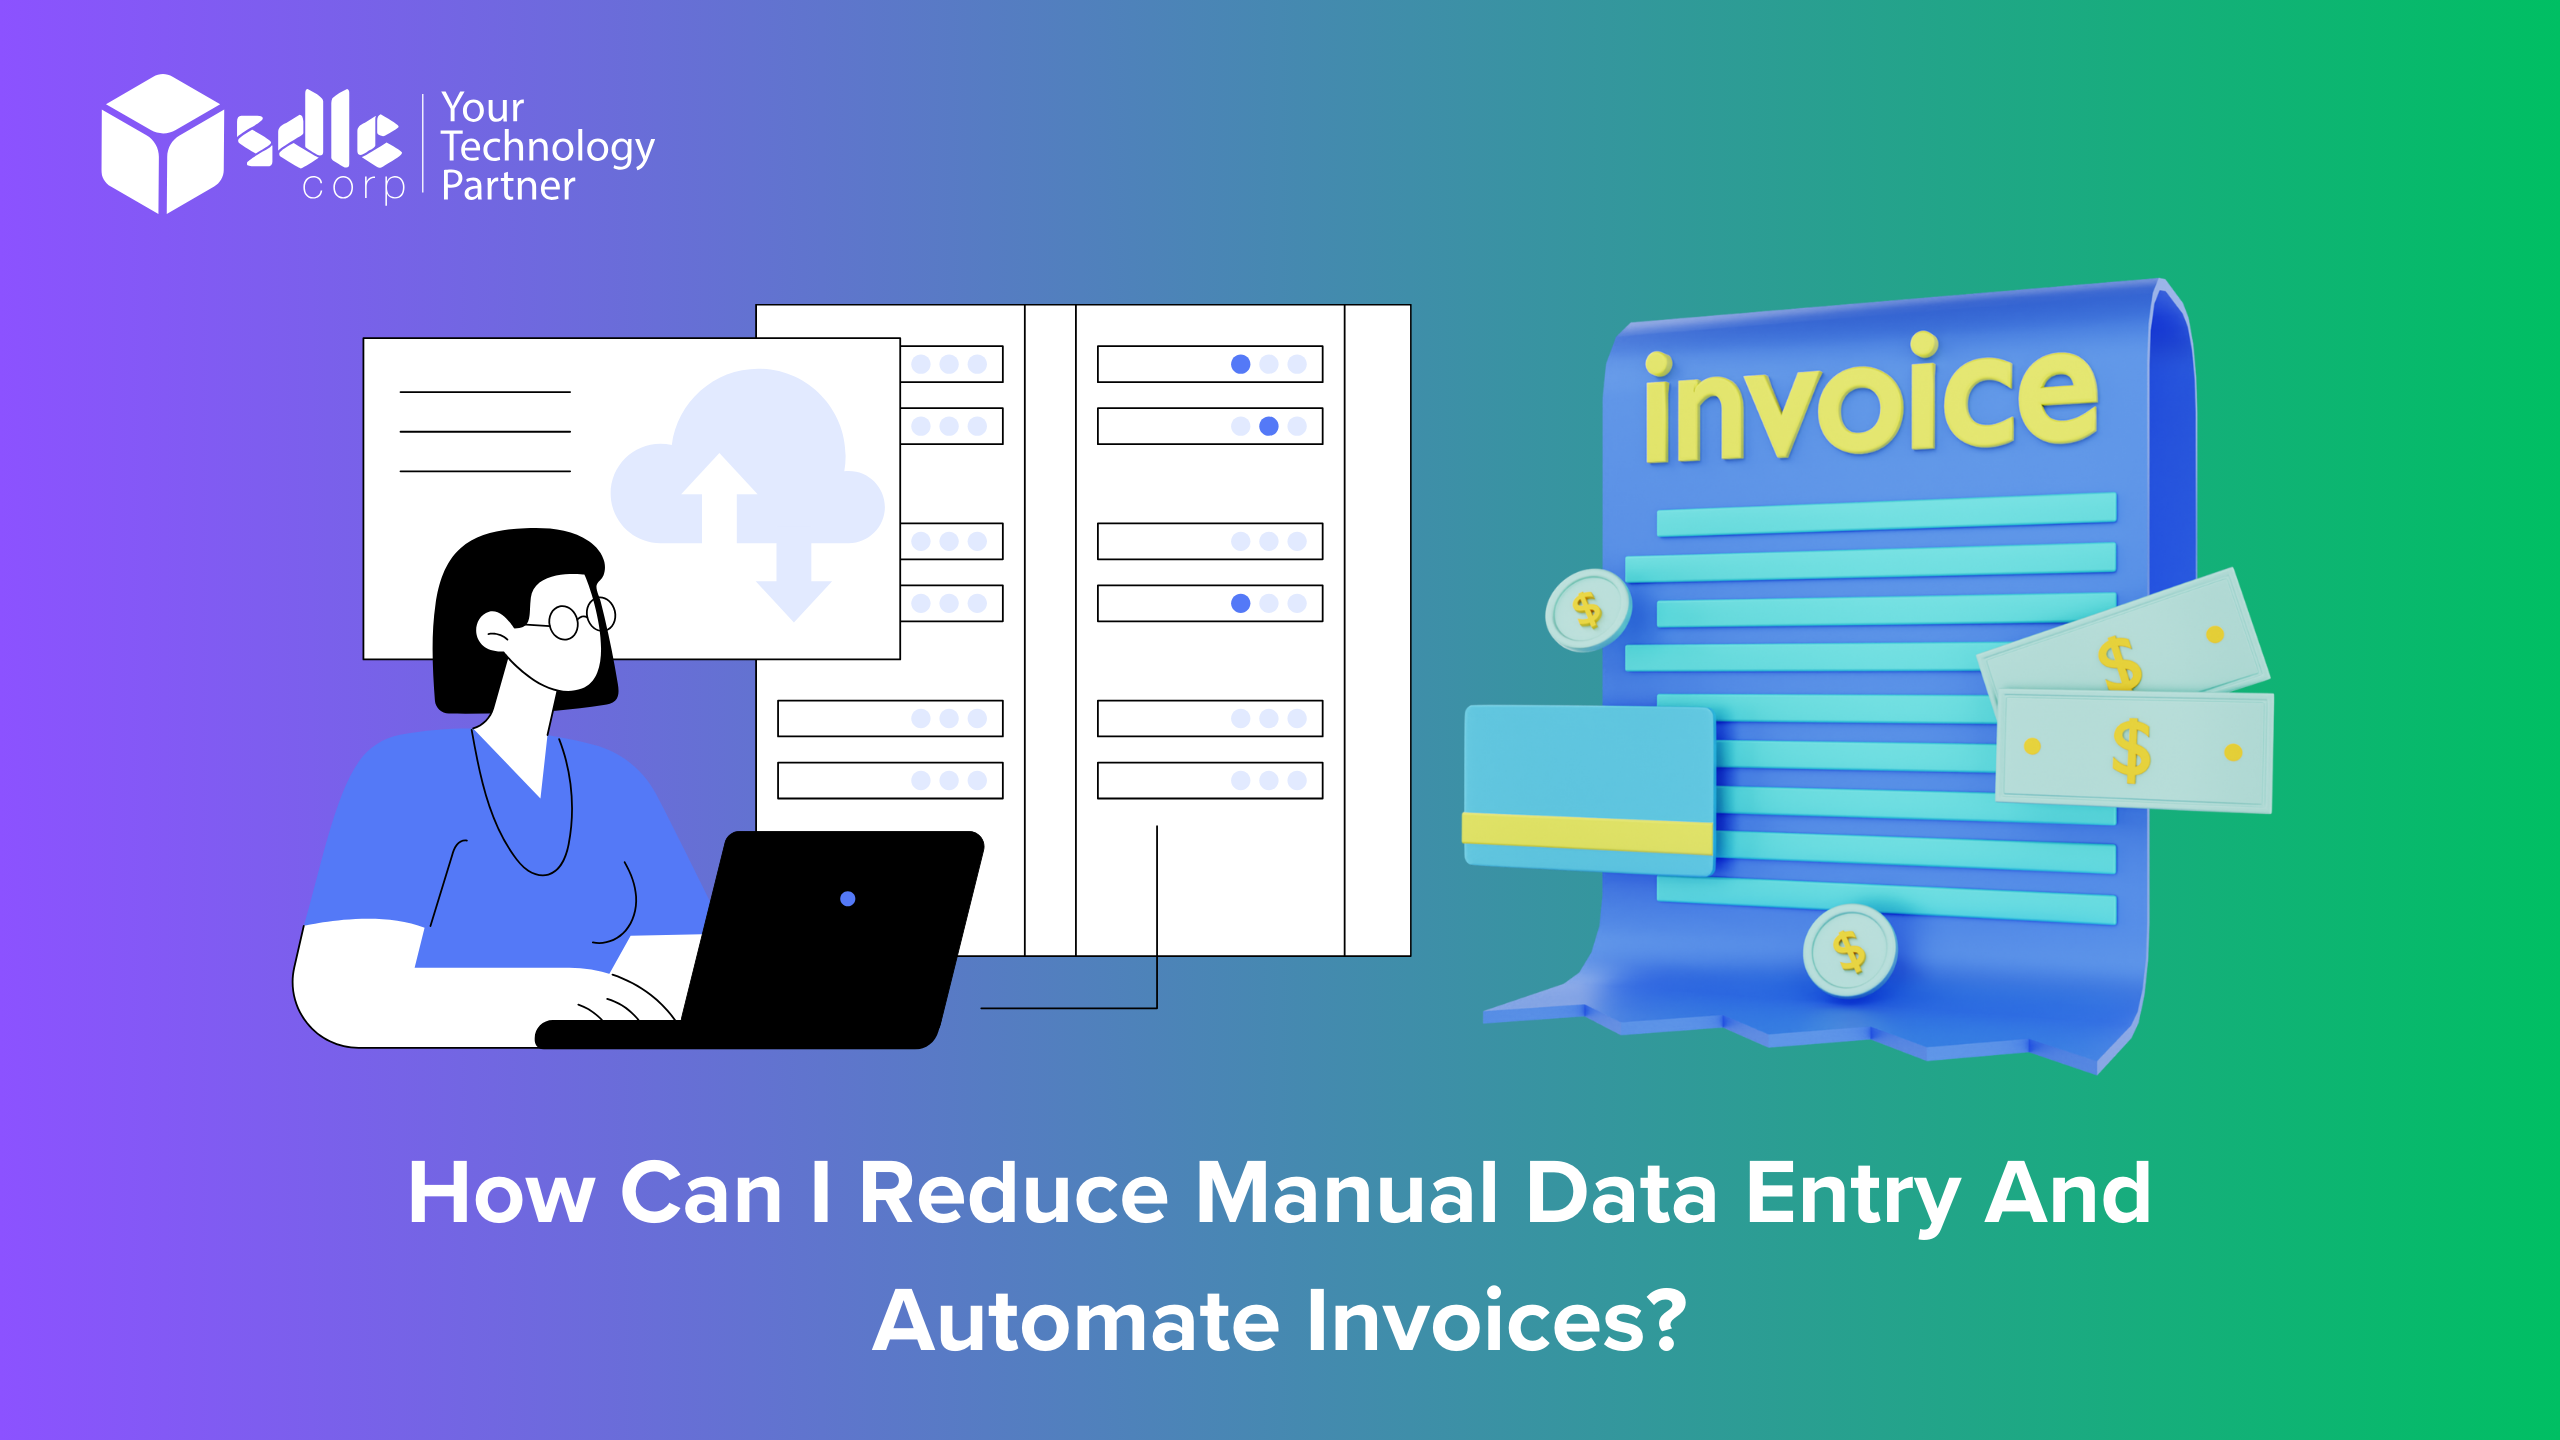 How can I reduce manual data entry and automate invoices